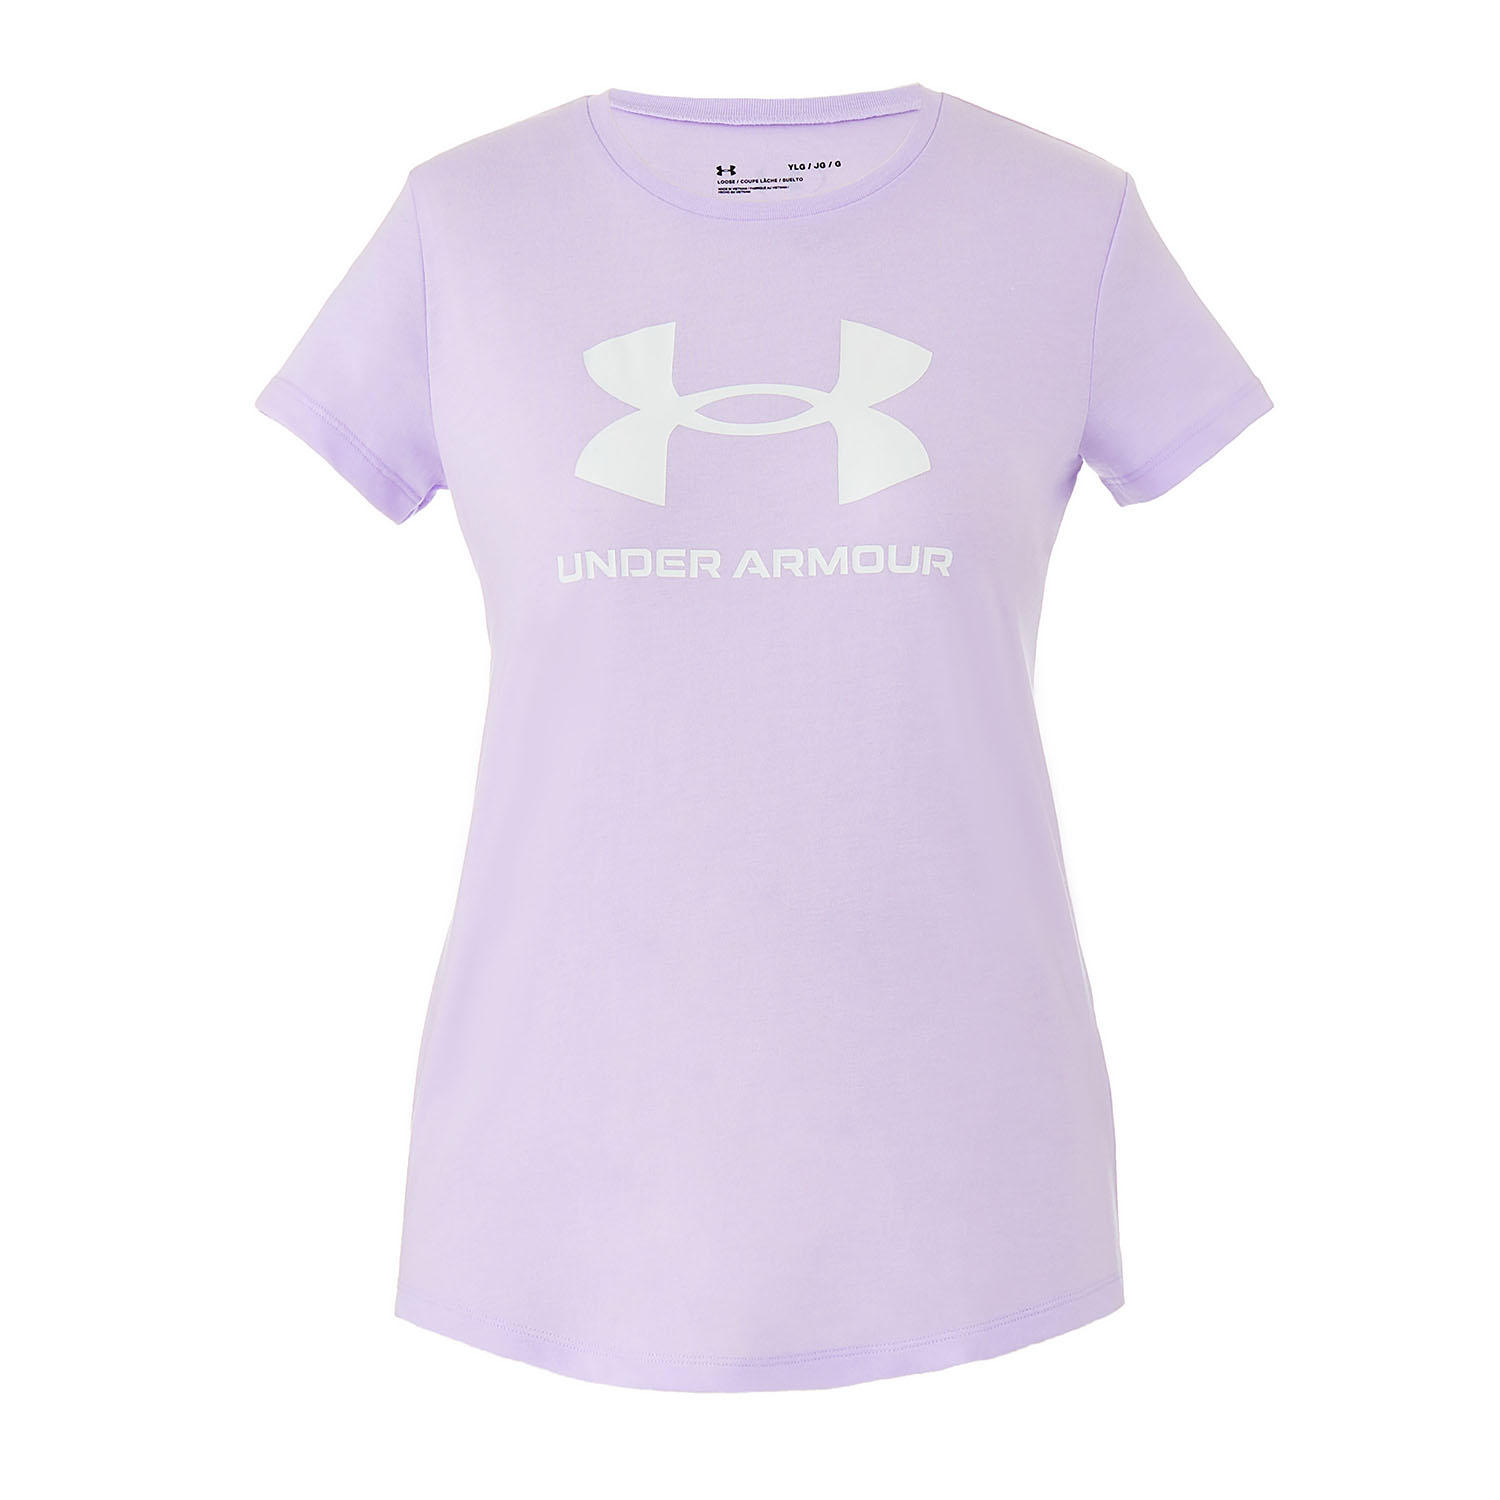 Under Armour Girls Graphic Short Sleeve Tee Pink L